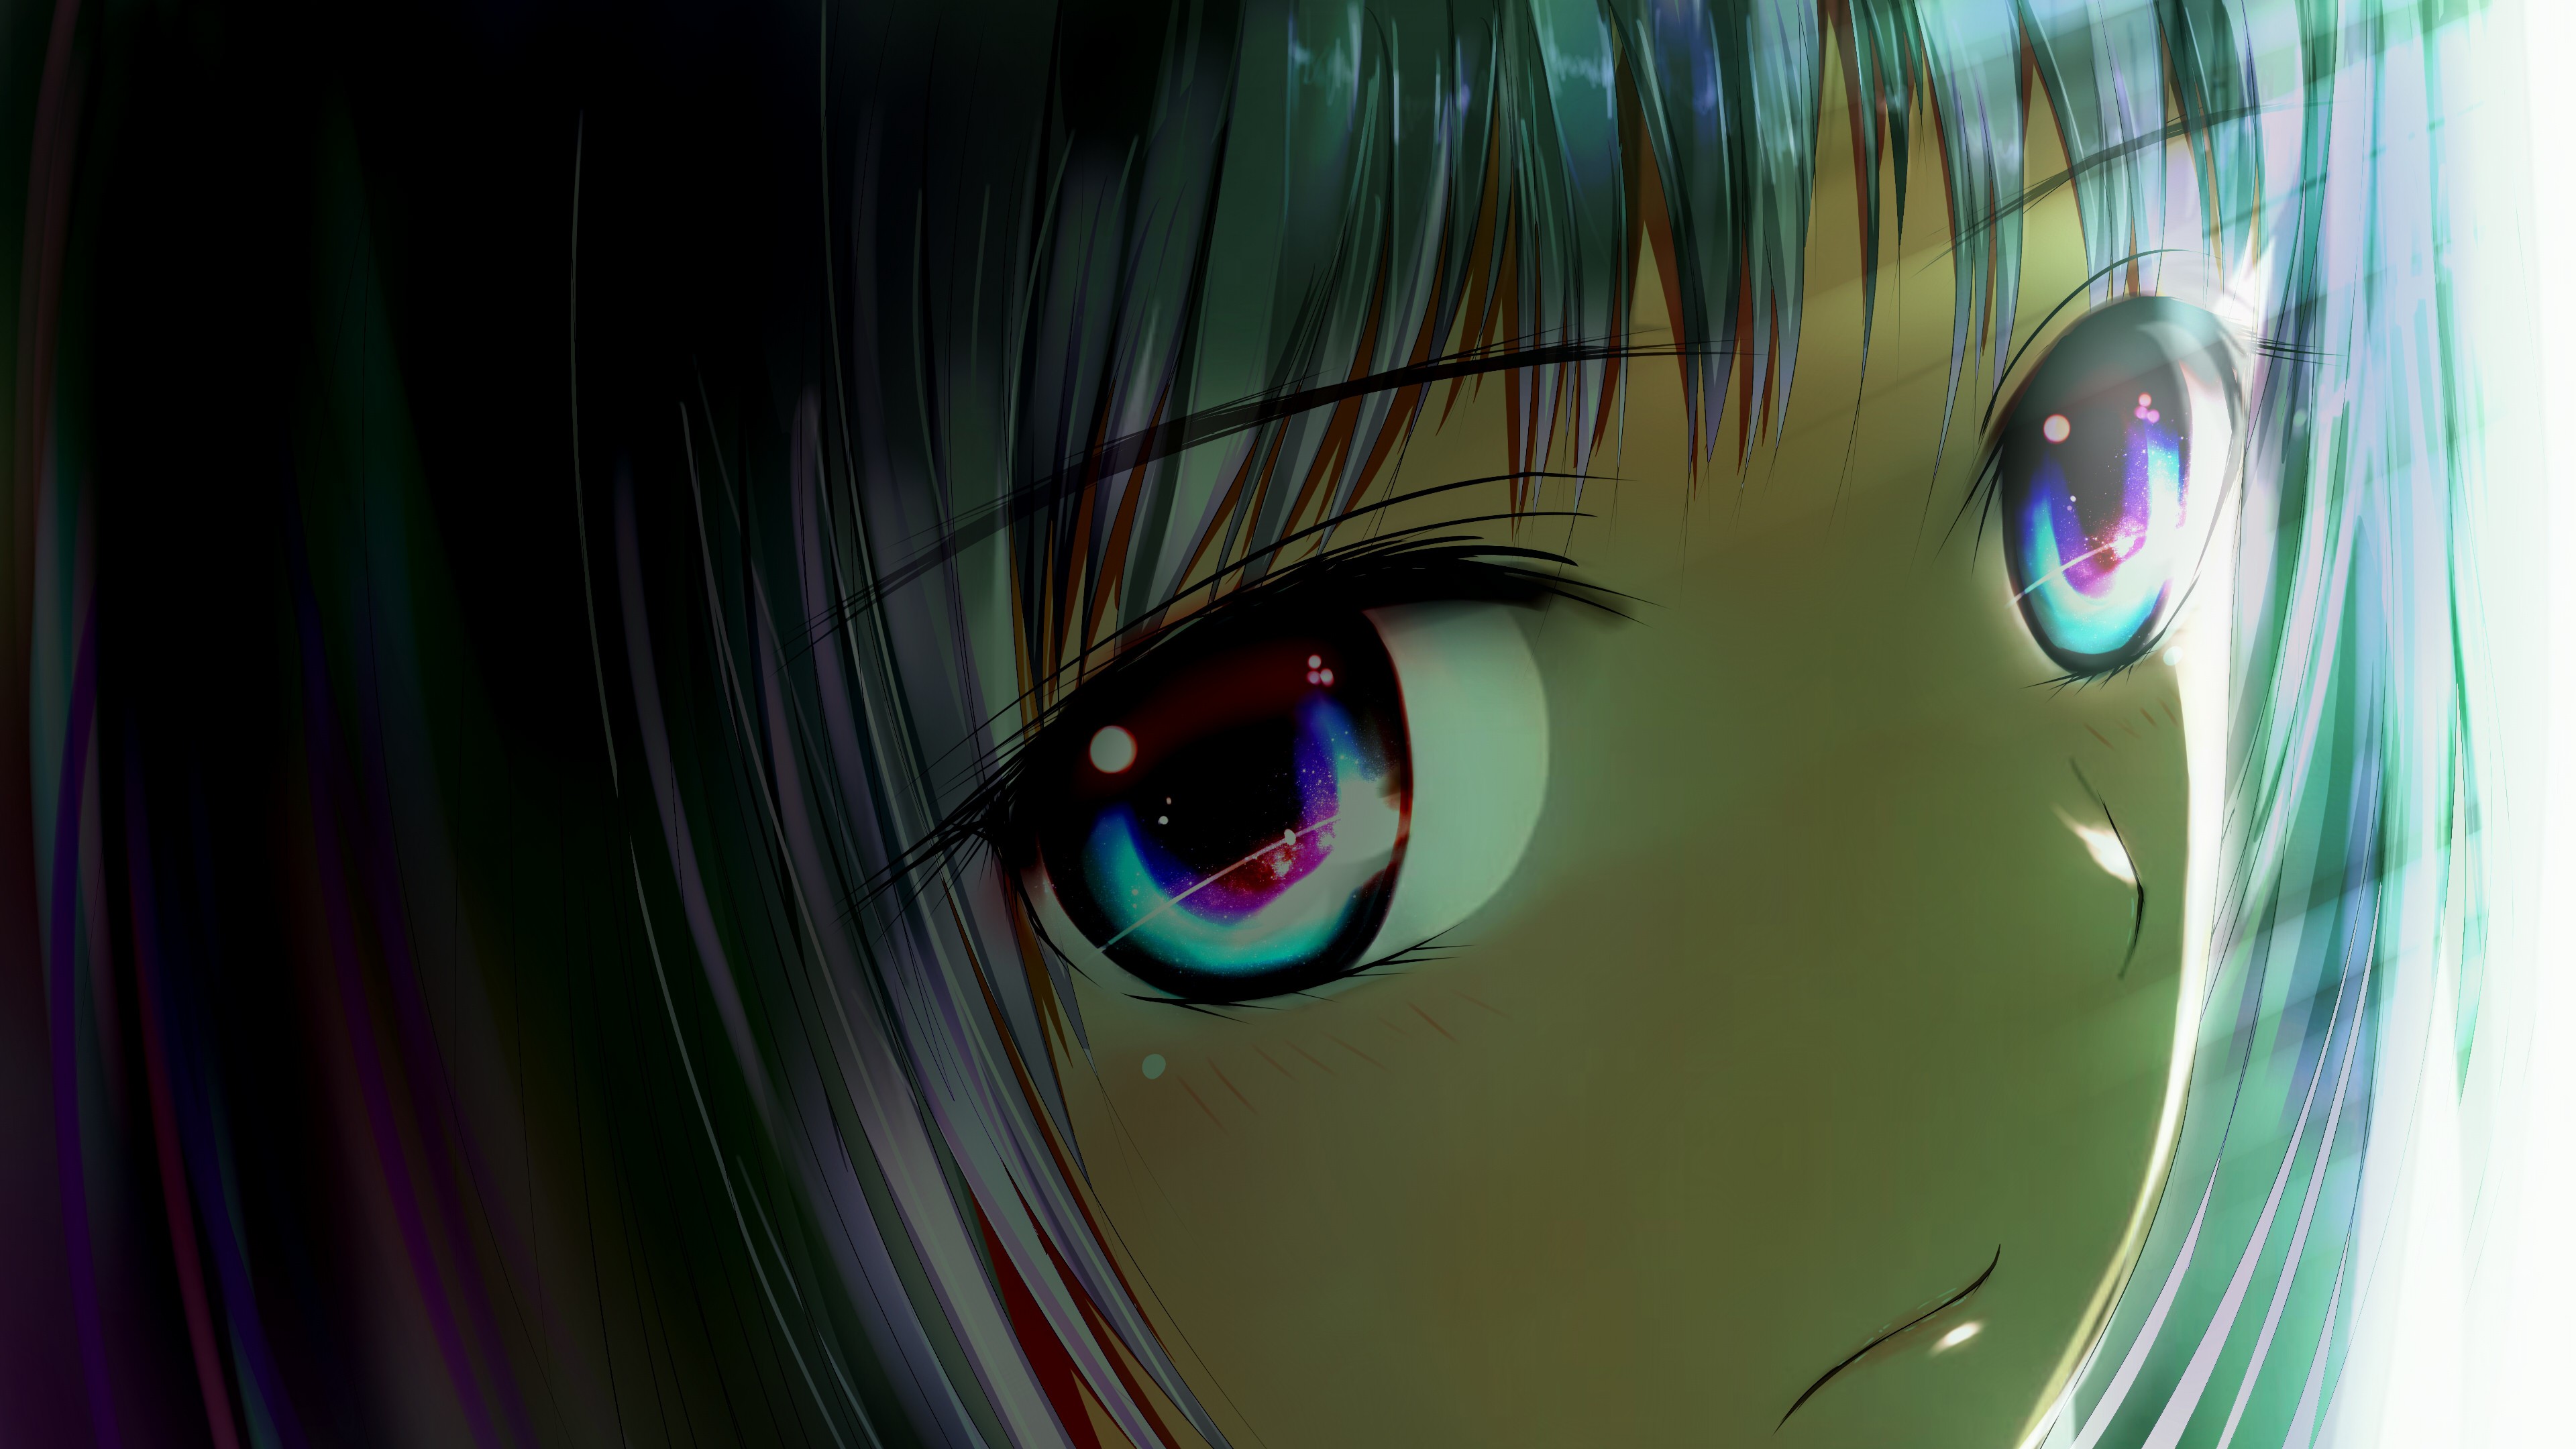 face eyes anime girls heterochromia colorful frontal view  1806x1080  Wallpaper  wallhavencc